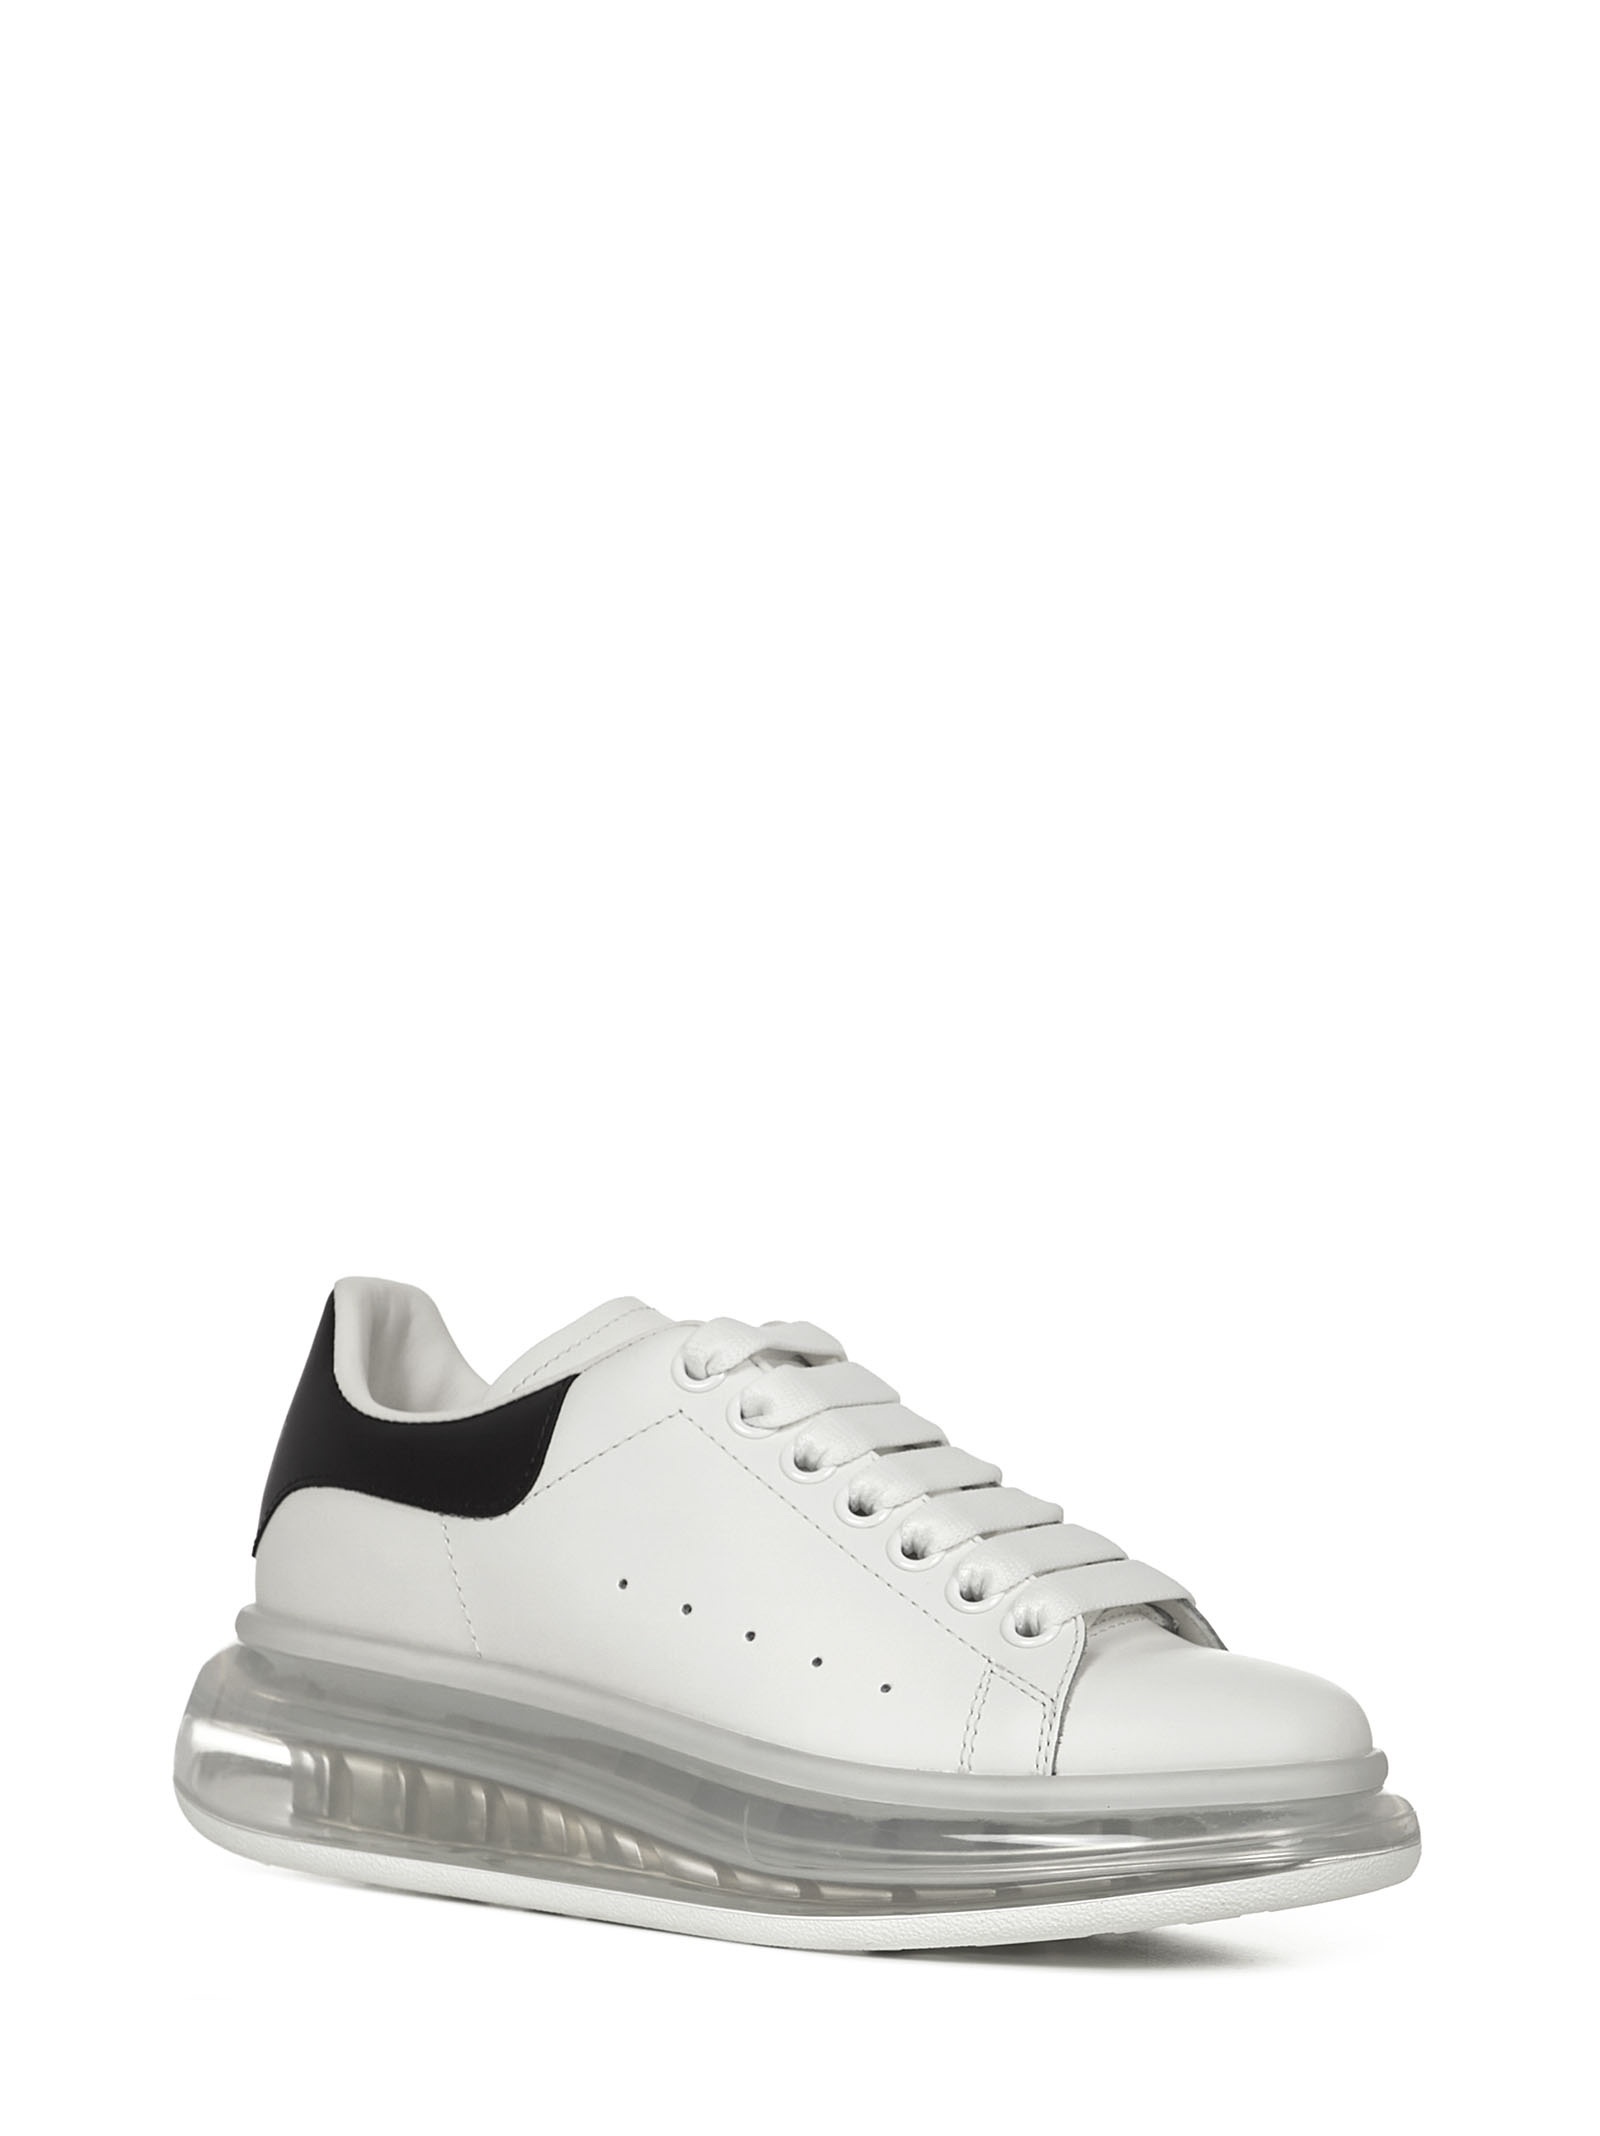 Larry sneakers in white calfskin with black leather insert on the heel and transparent oversized sol - 2